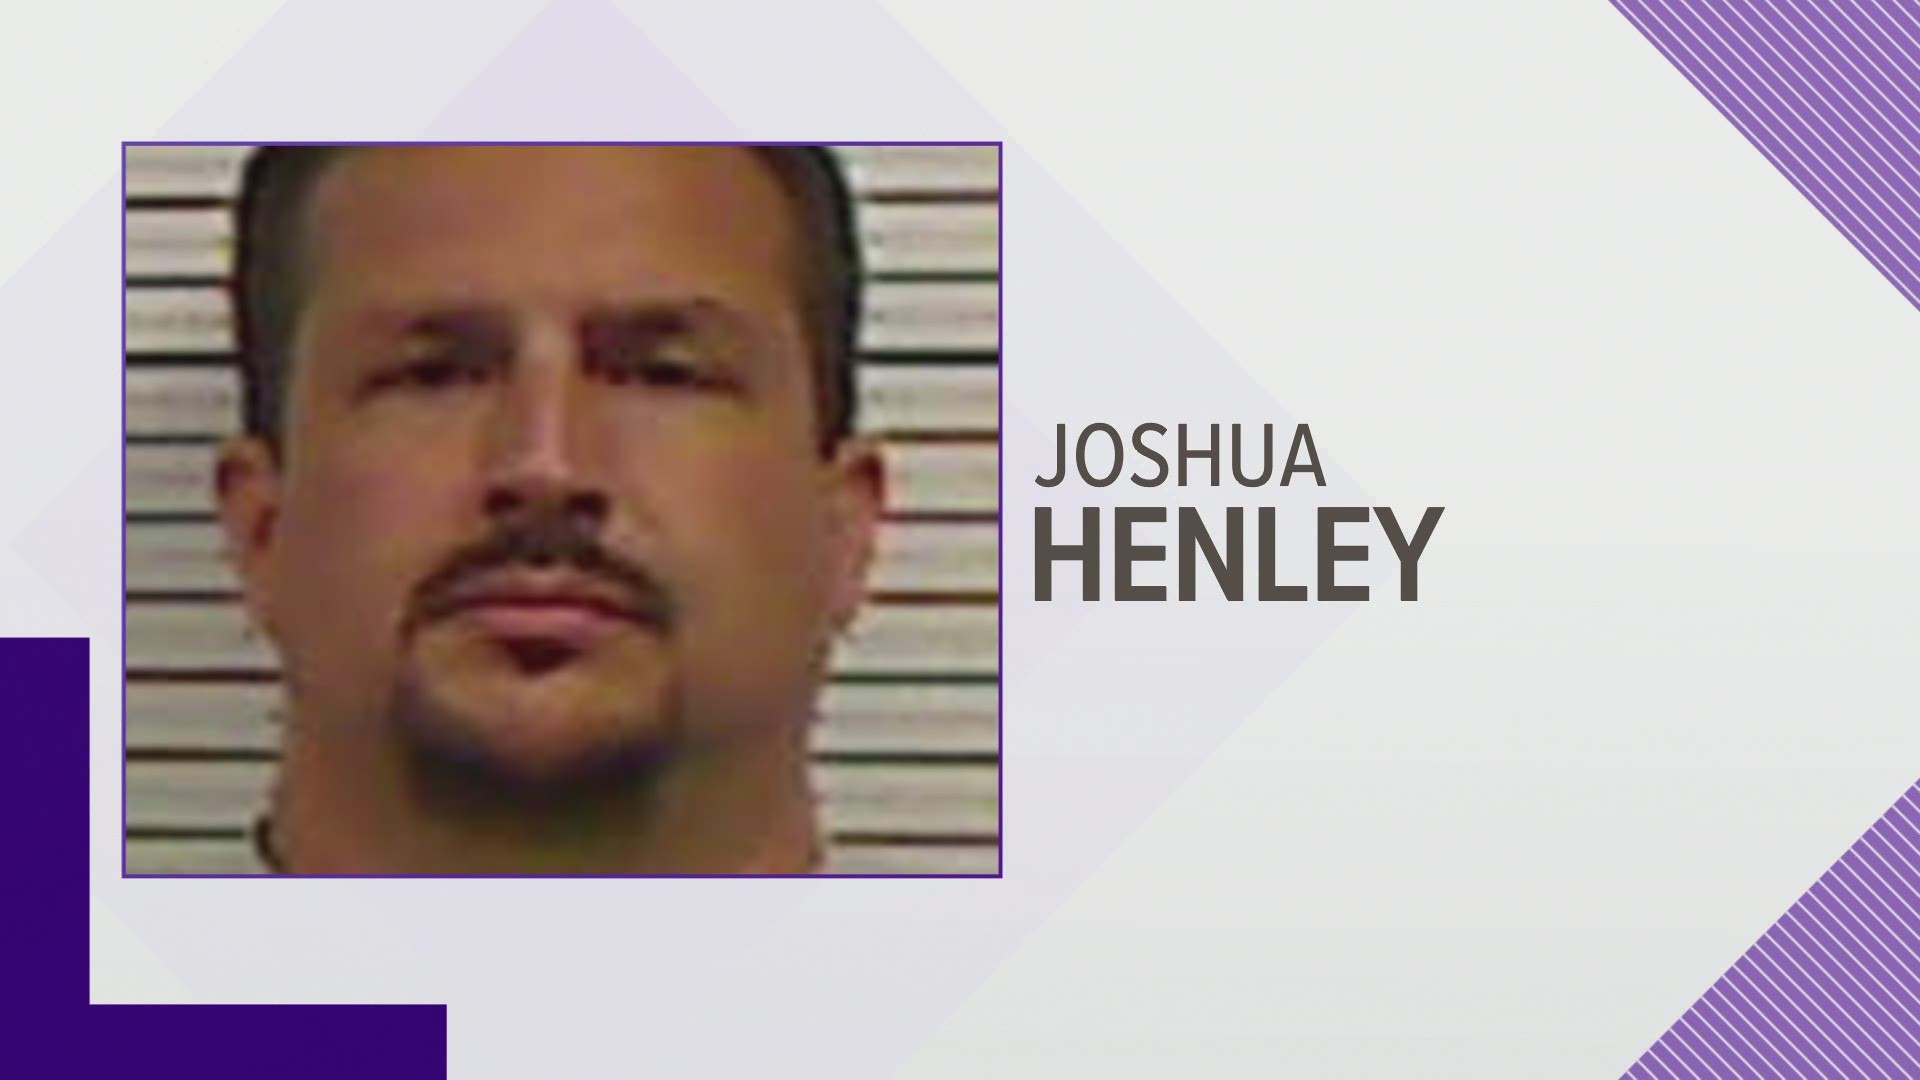 Authorities say Joshua Burton Henley had multiple victims between the ages of 12 and 16 in at least three states, and police believe there may be more victims.